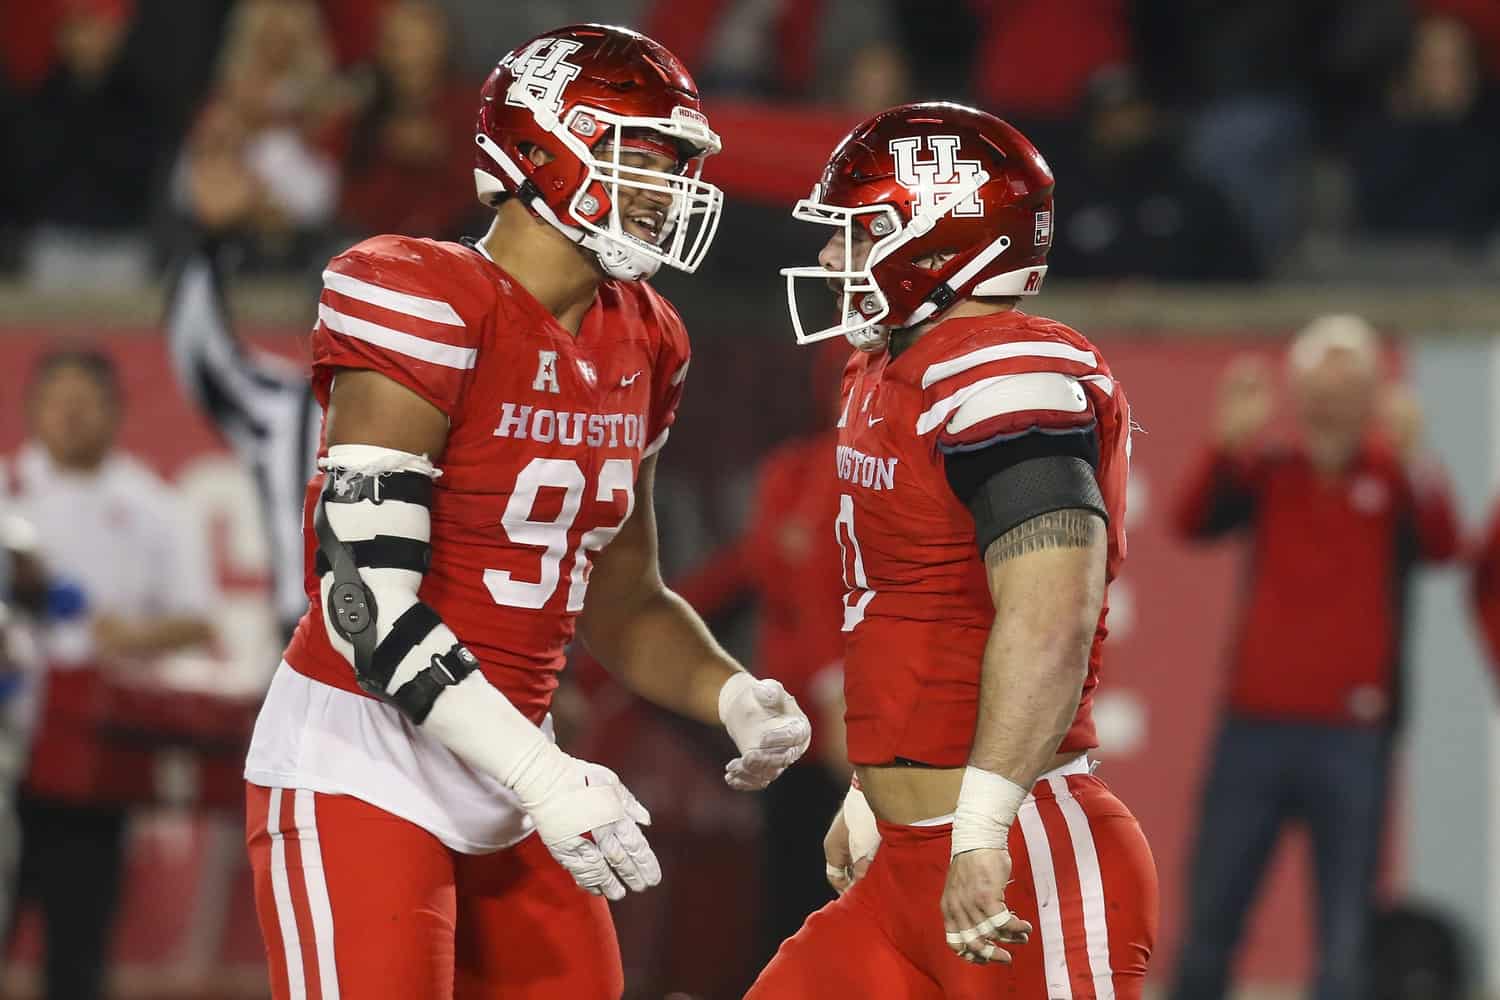 Houston Pro Day headlined by Logan Hall, busy schedule ahead for